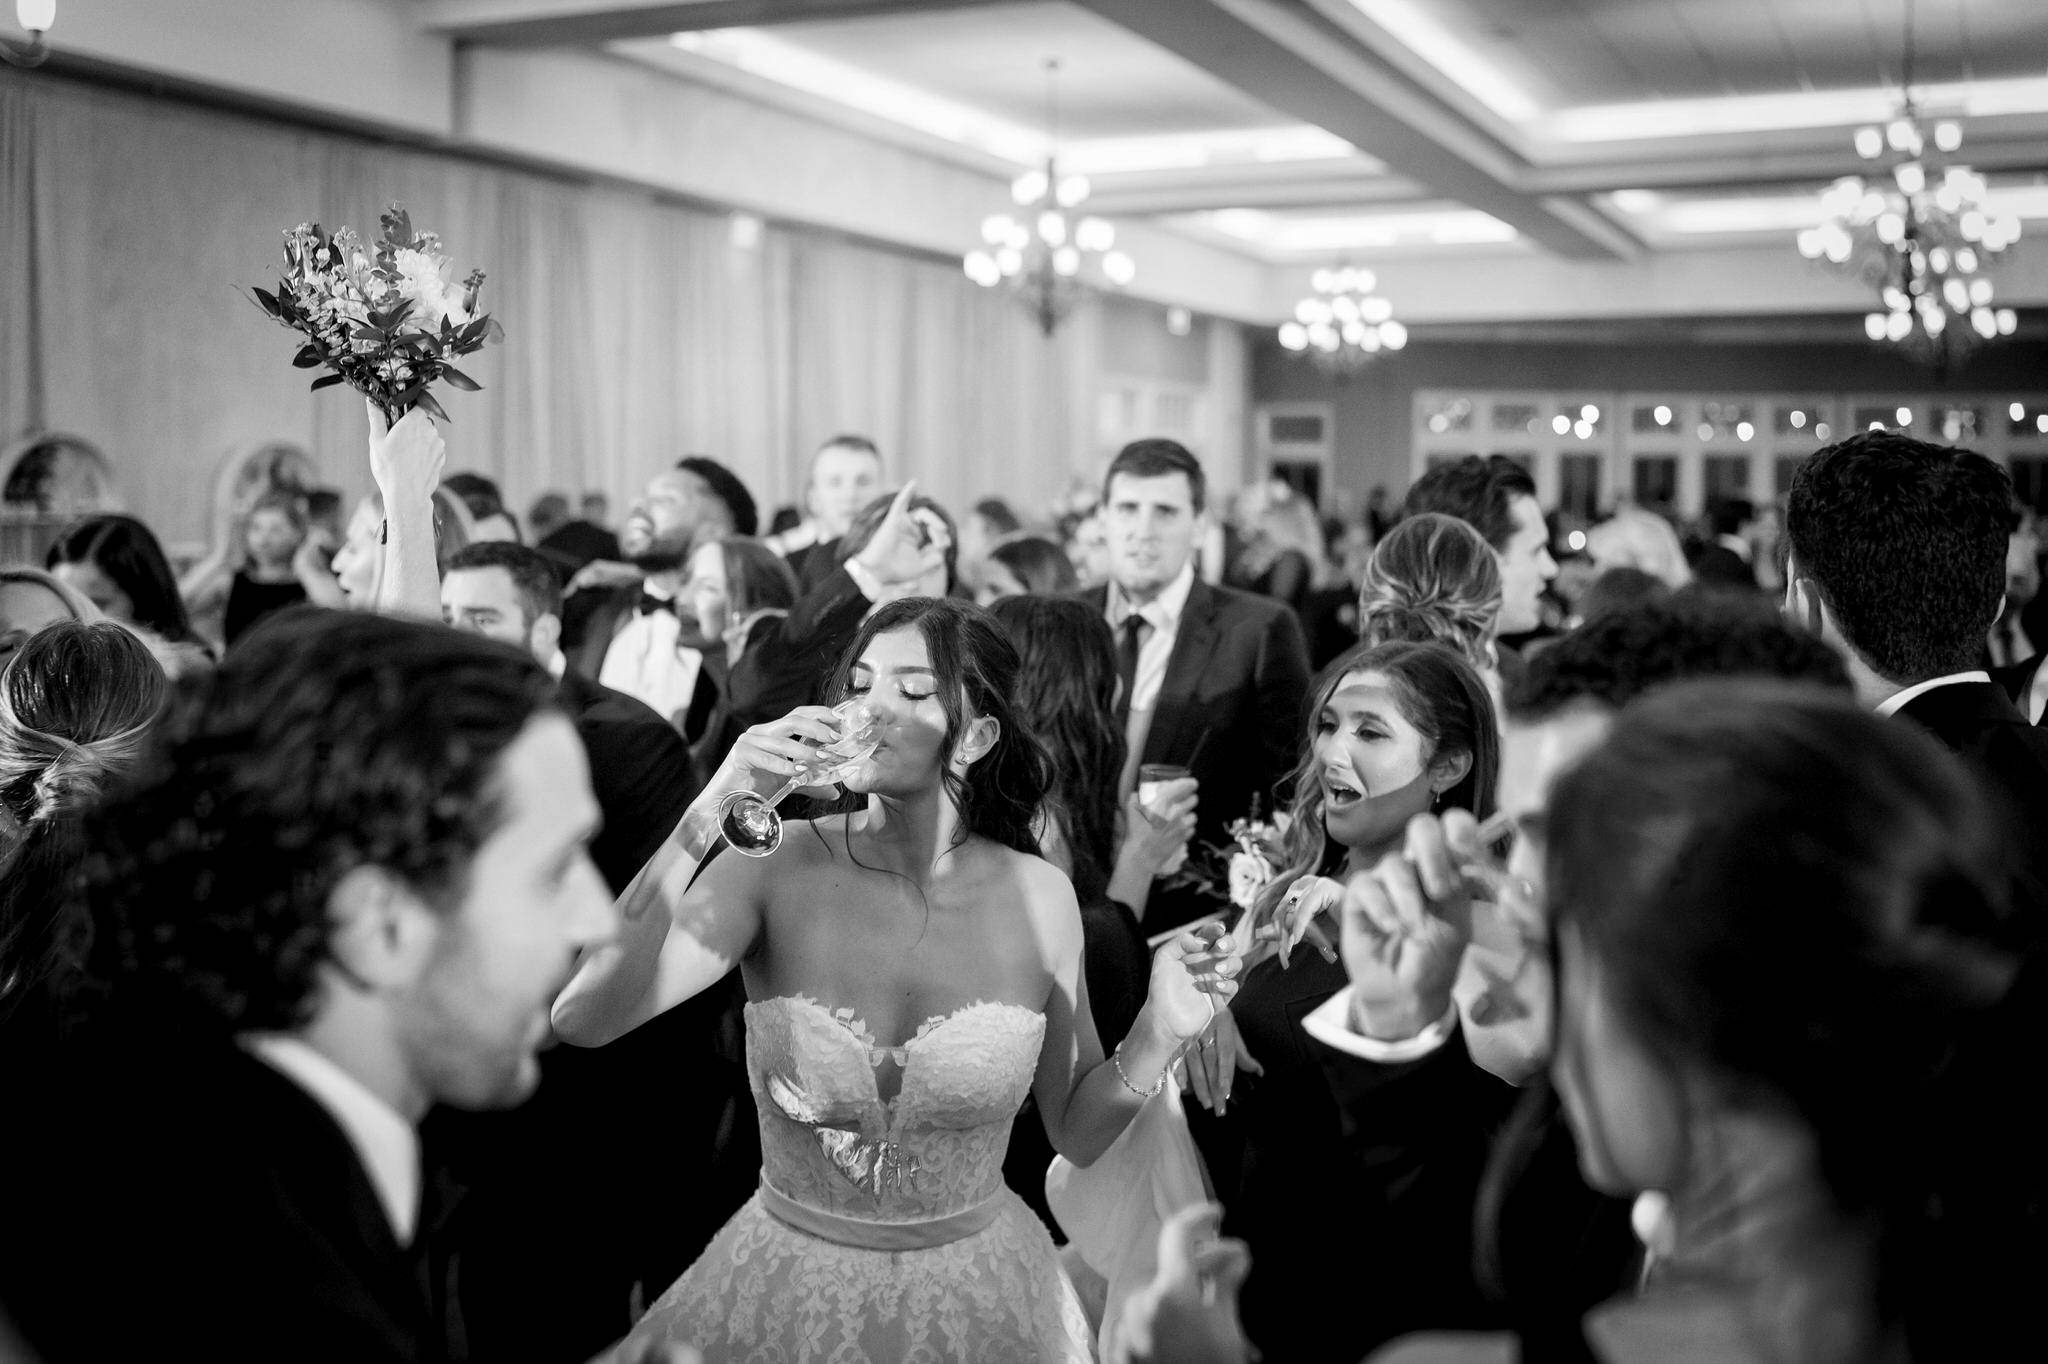 A bride takes a drink while surrounded by guests on her dance floor at Bay Harbor.  